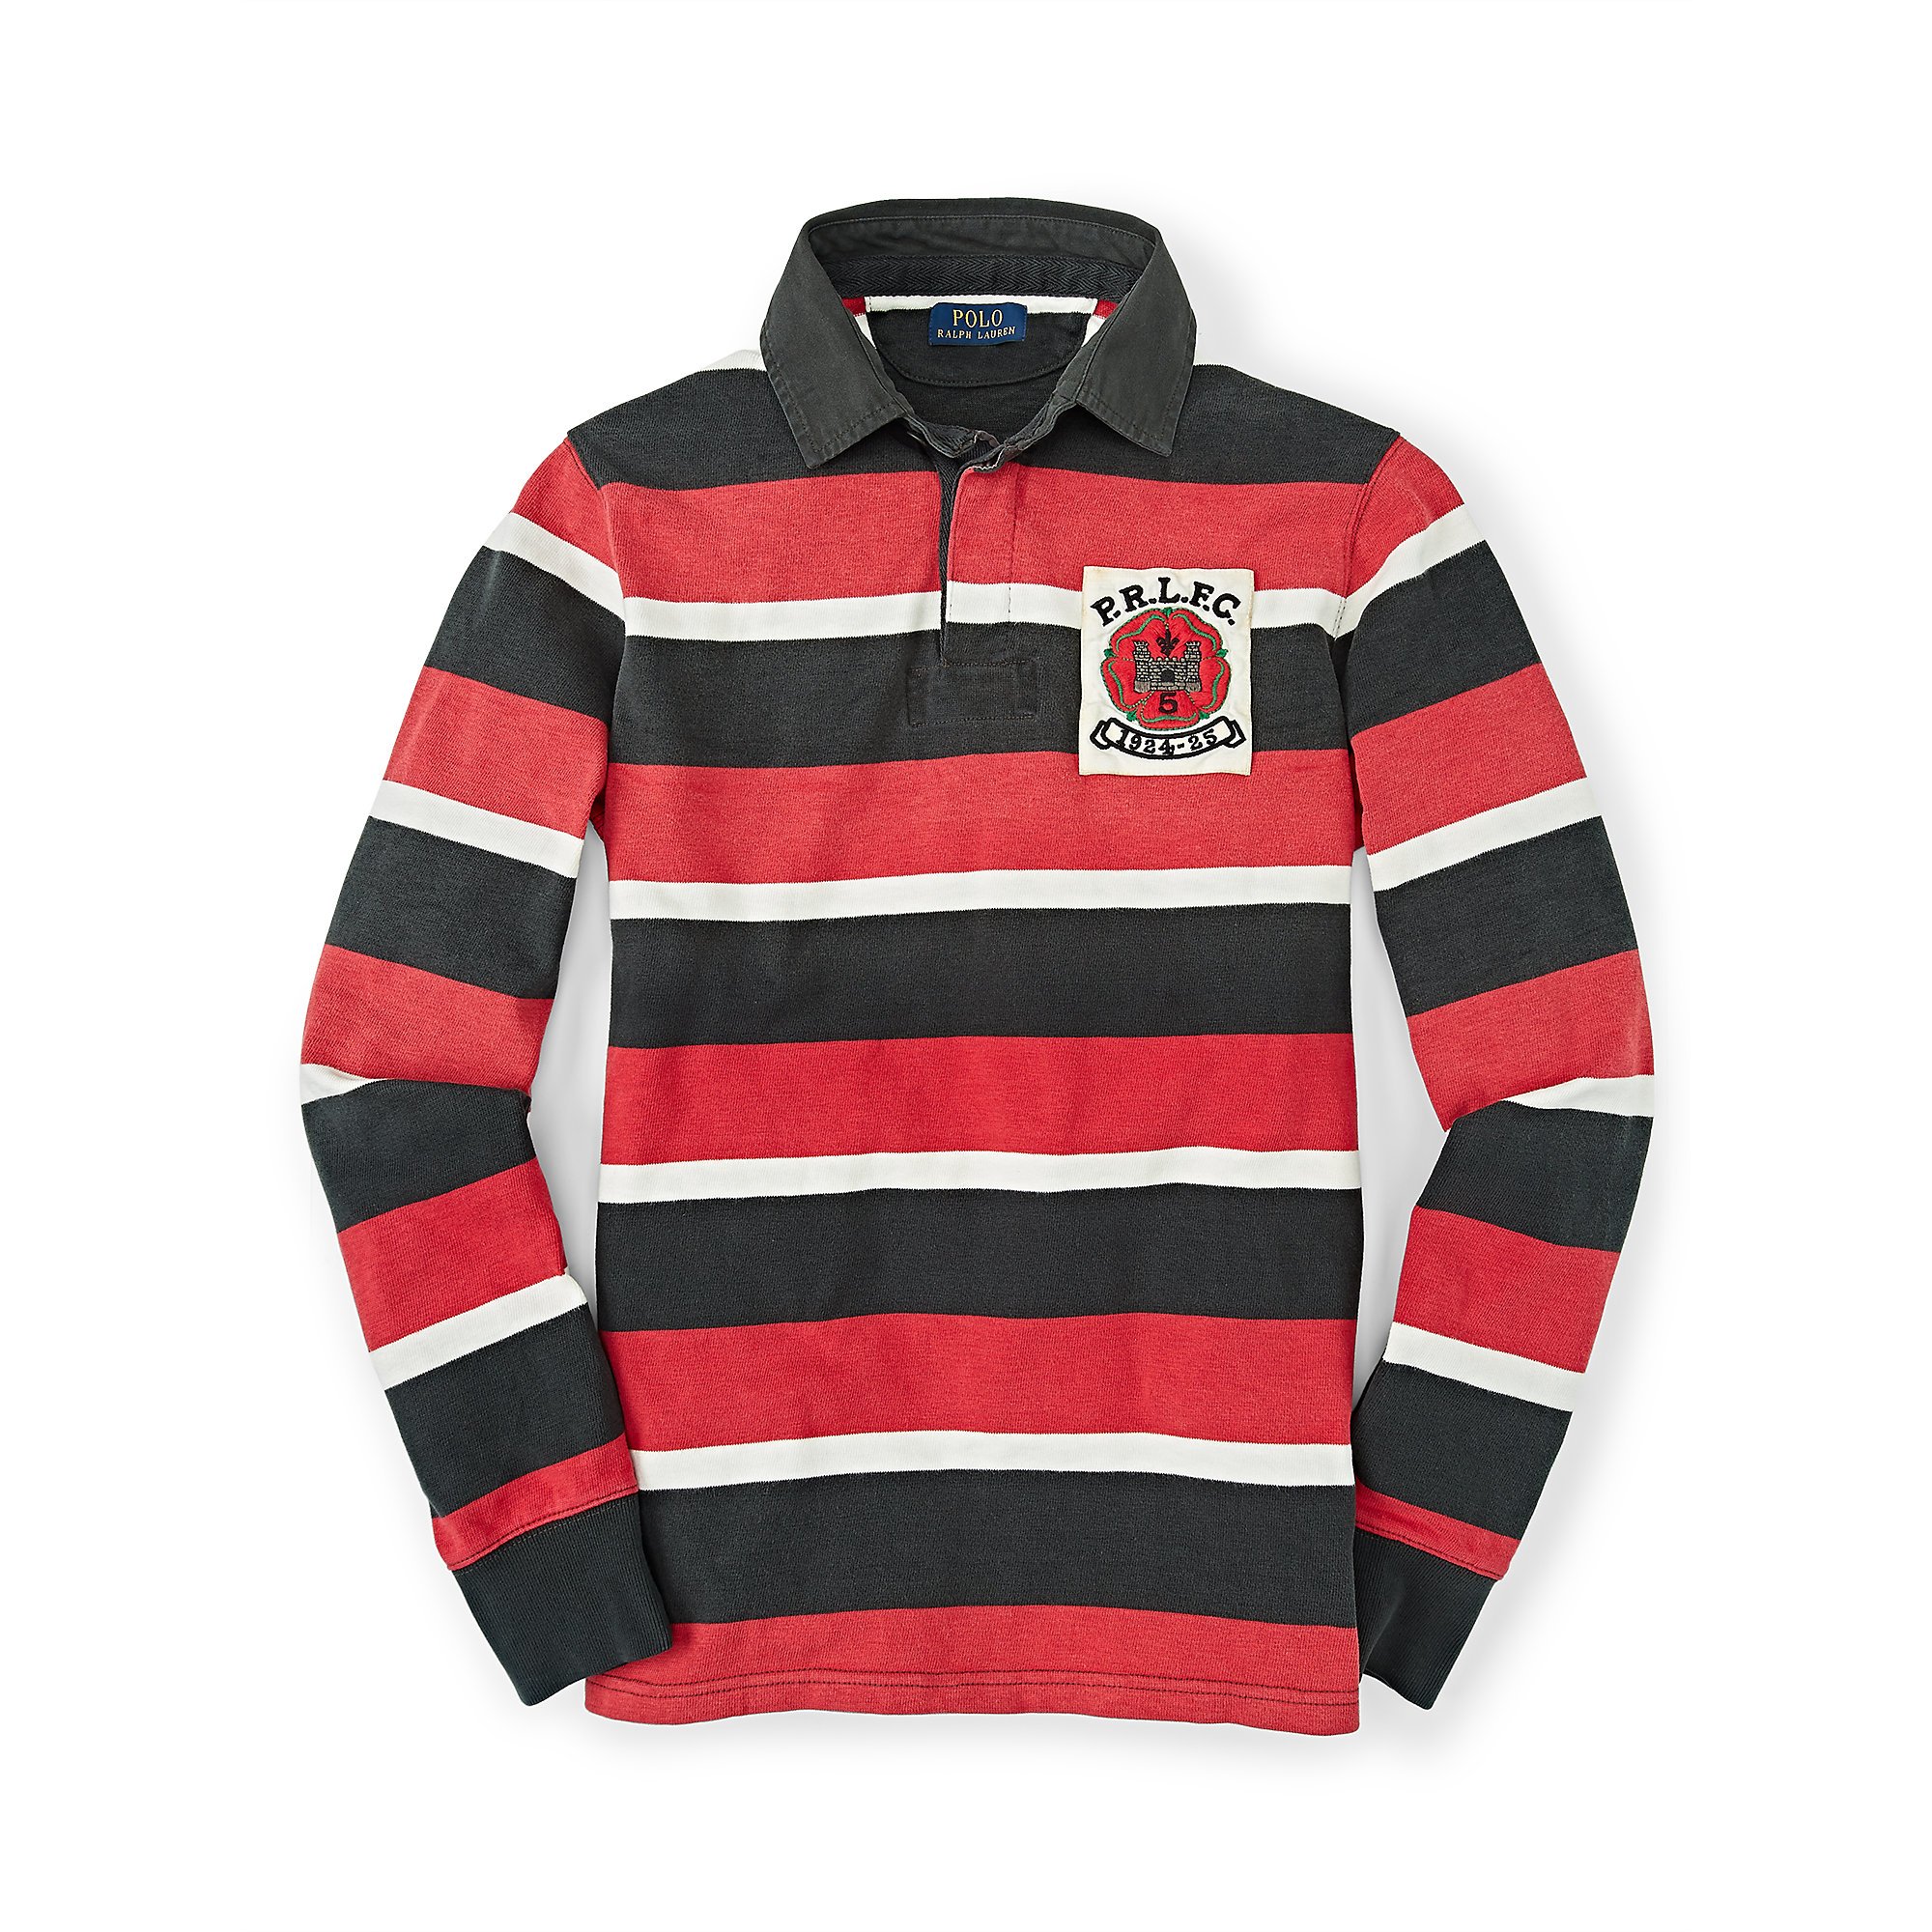 Polo Ralph Lauren Jewel Red Multi Striped Cotton Rugby Shirt Red Product 1 999328568 Normal 